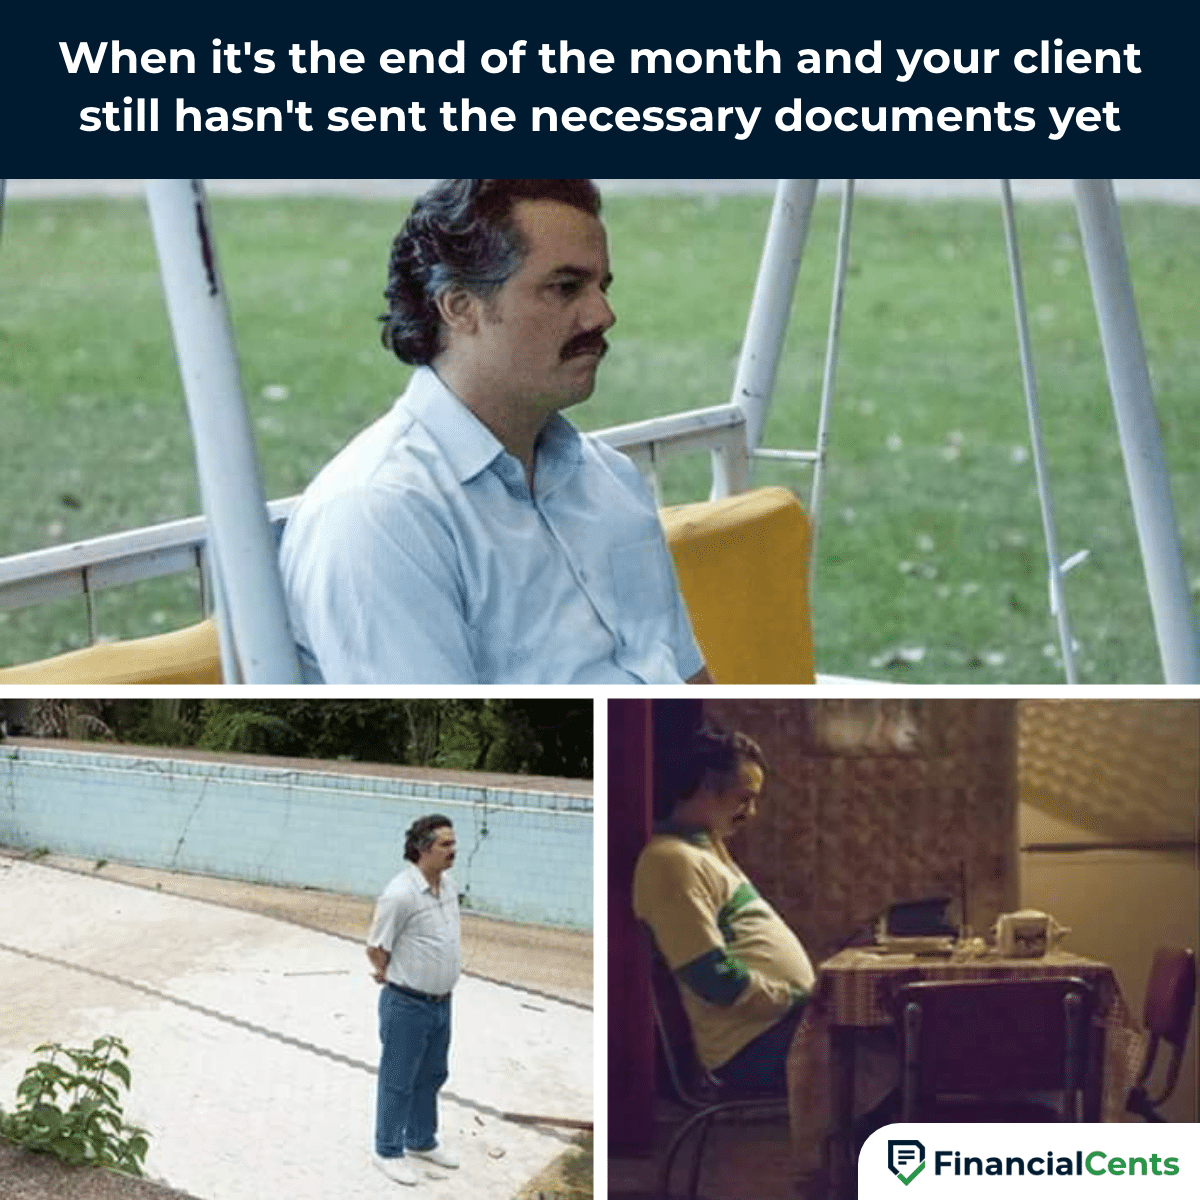 waiting for accounting clients documents at the end of the month meme